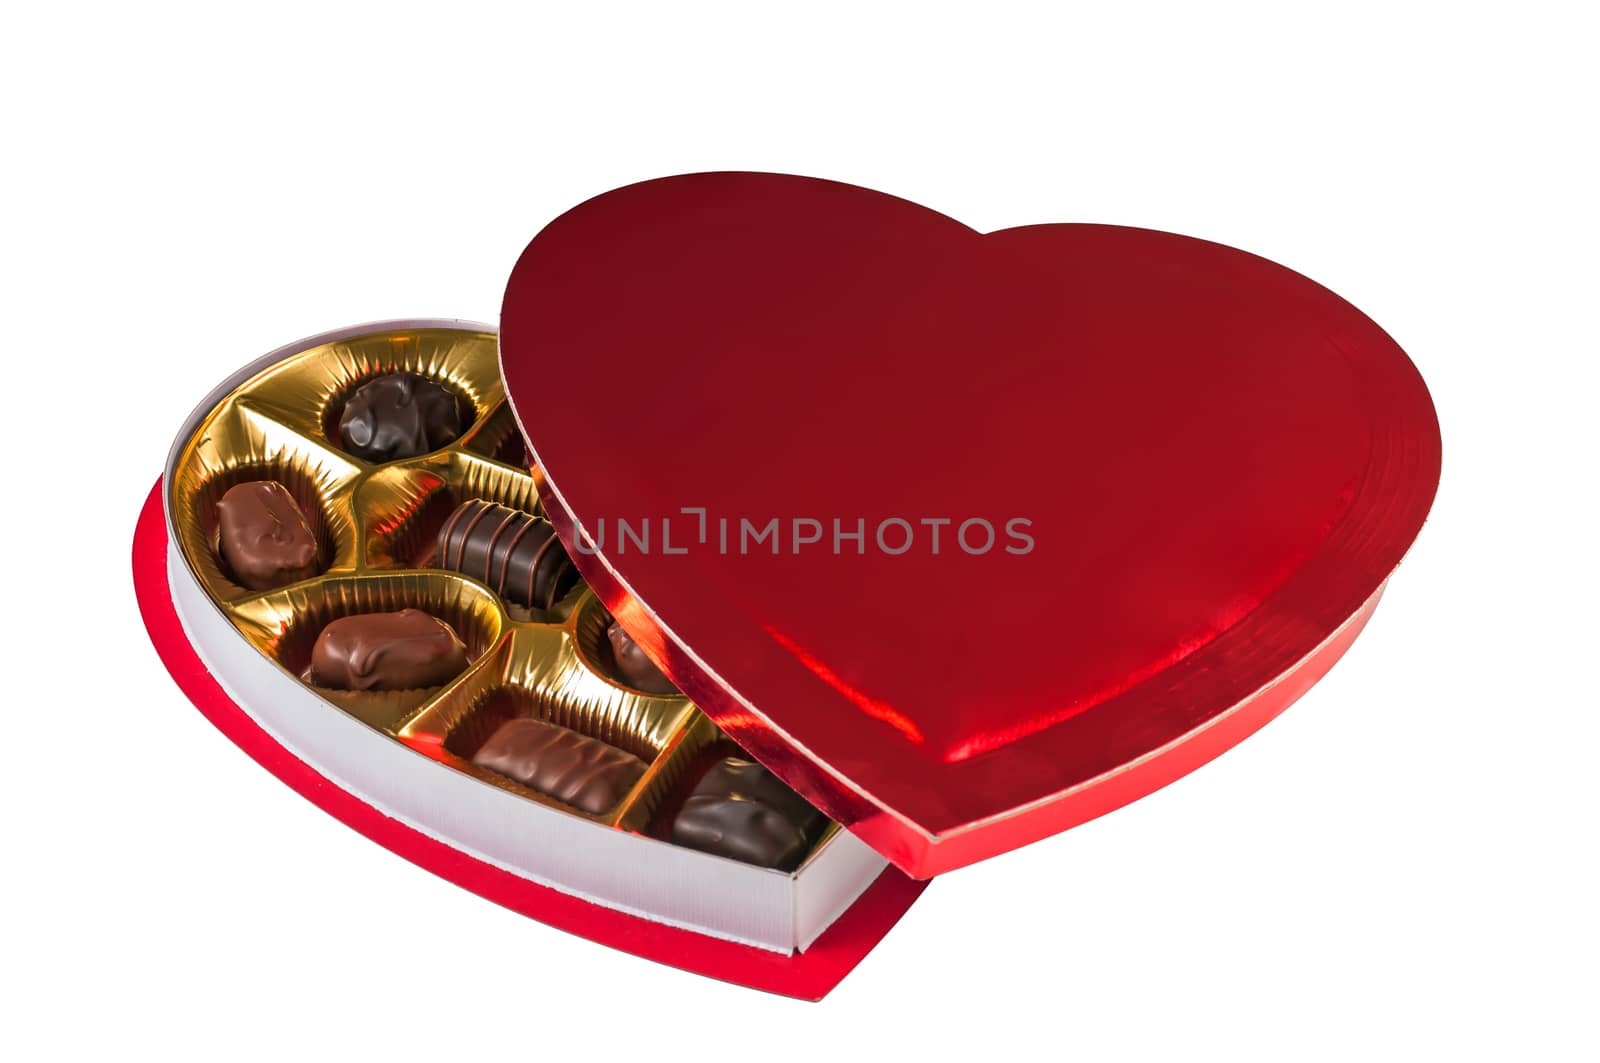 Assortment of chocolates in a heart shaped red box for a Valentine's day gift. Isolated on a white background with a clipping path